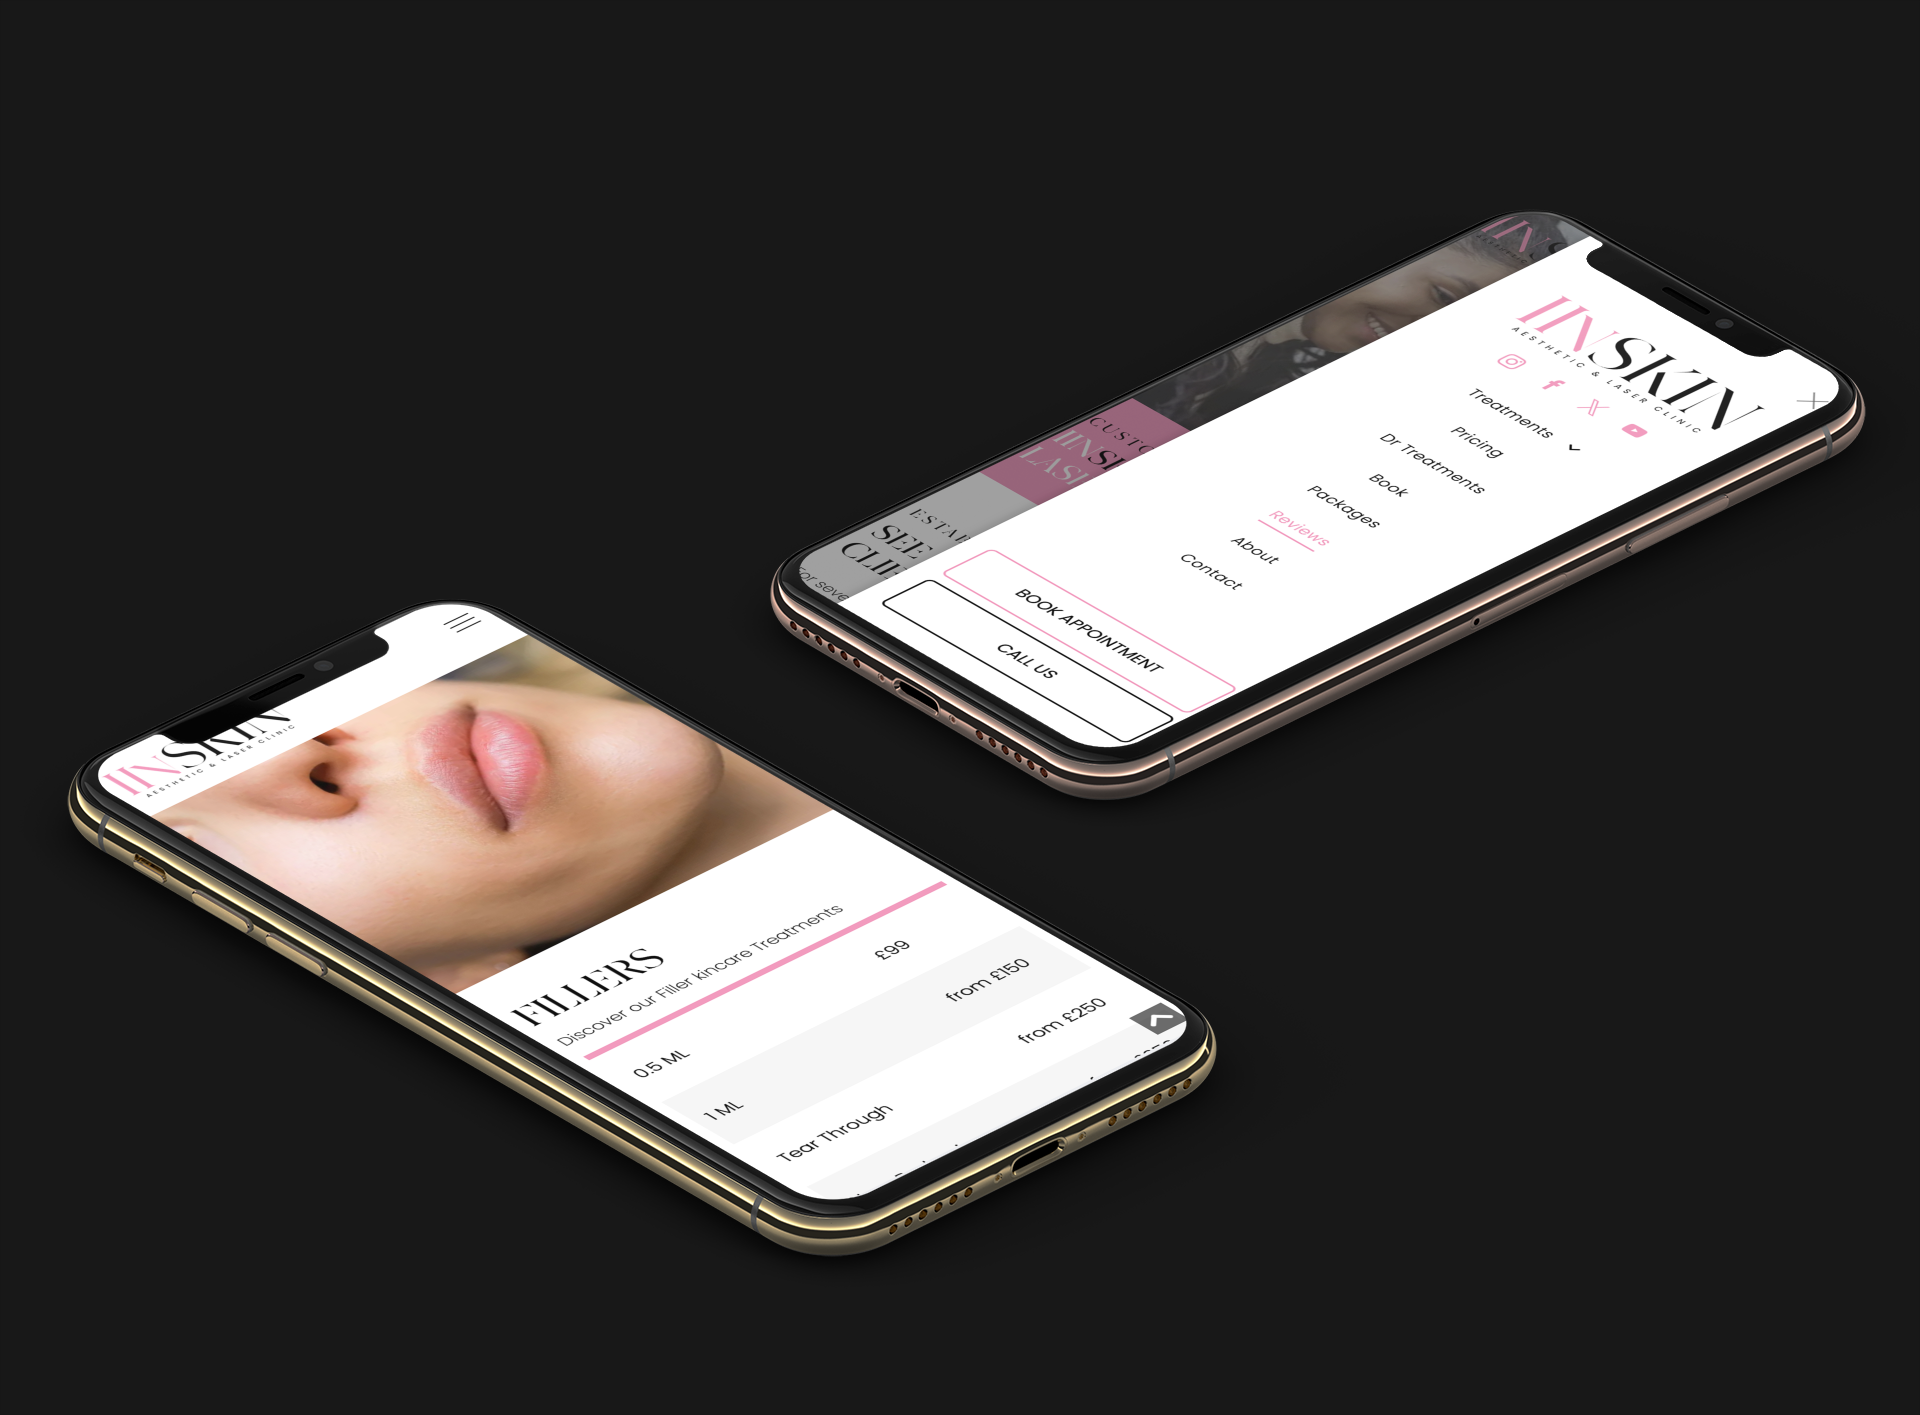 two phones with the display of the new responsive iinSkin website